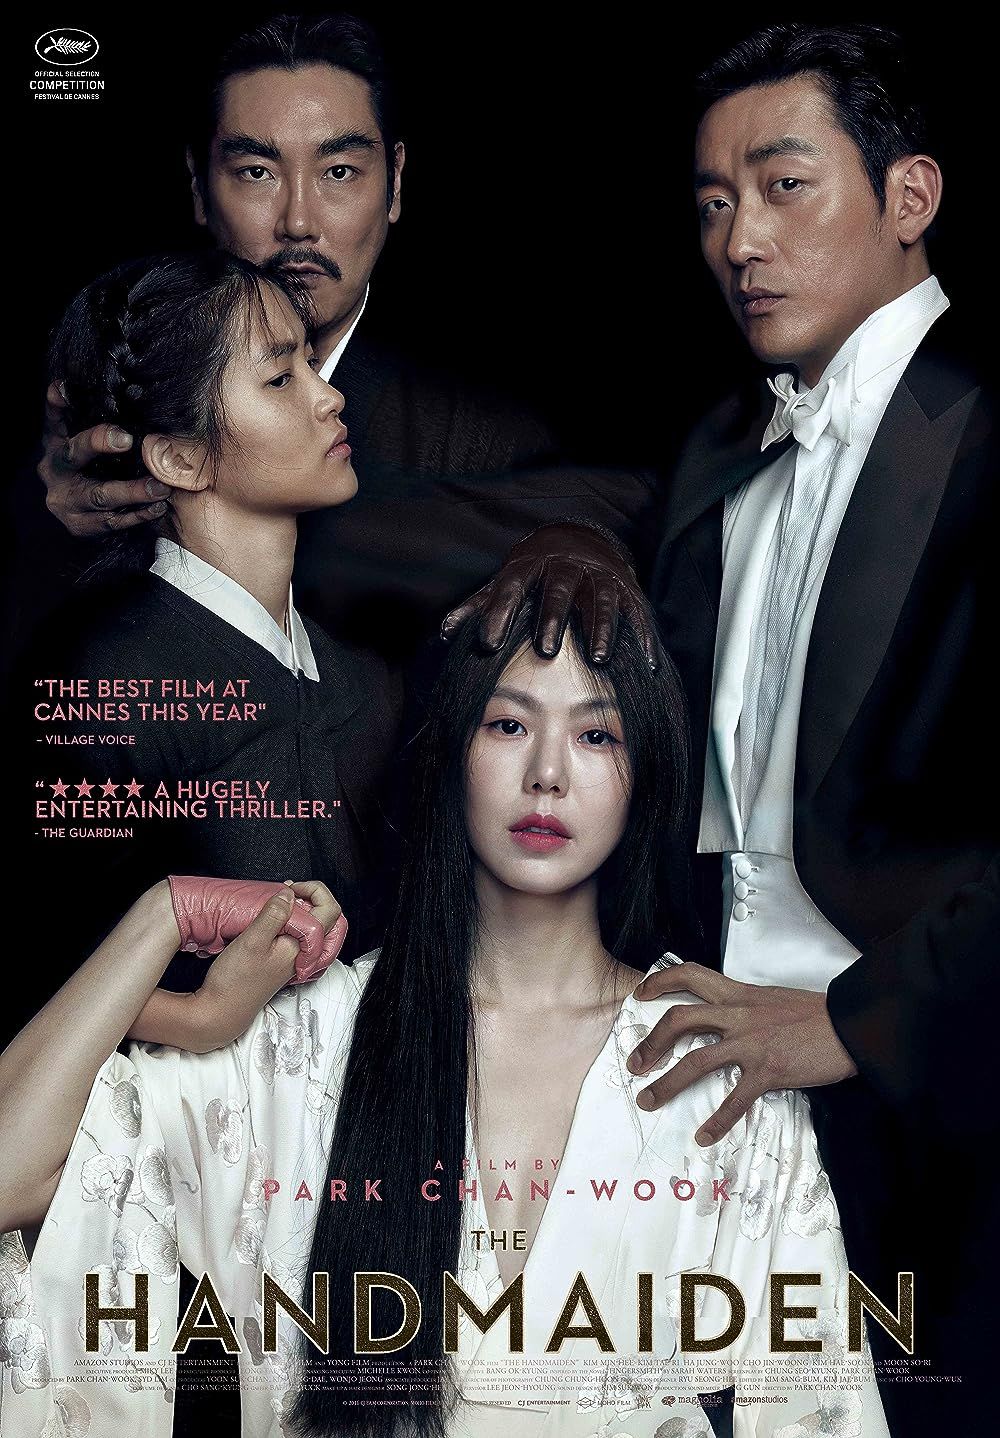 The Cast on The Handmaiden Poster